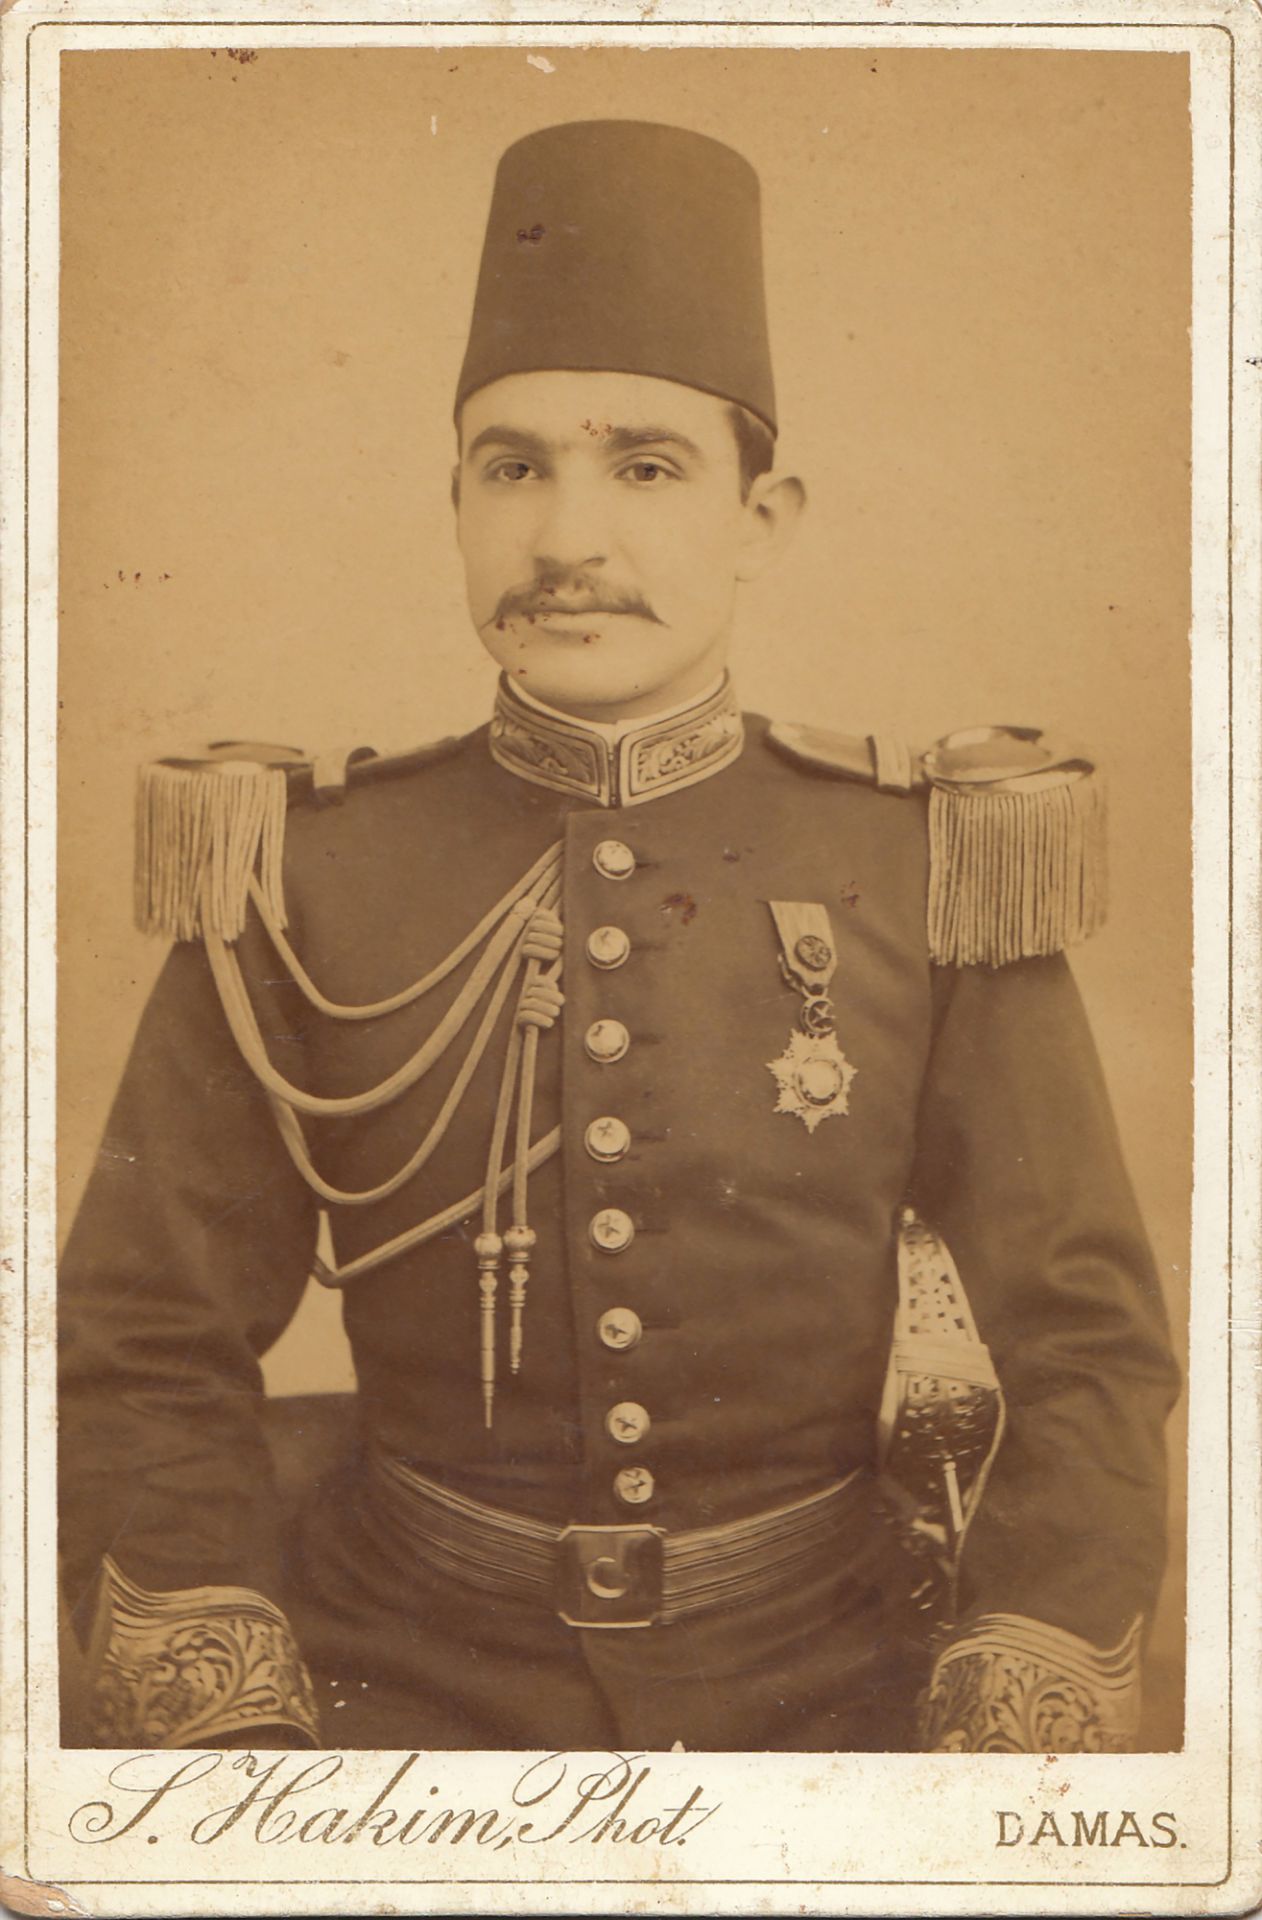 A RARE ARCHIVE ABOUT YEMEN, BELONGED TO AHMED IZZET PASHA - Image 43 of 77